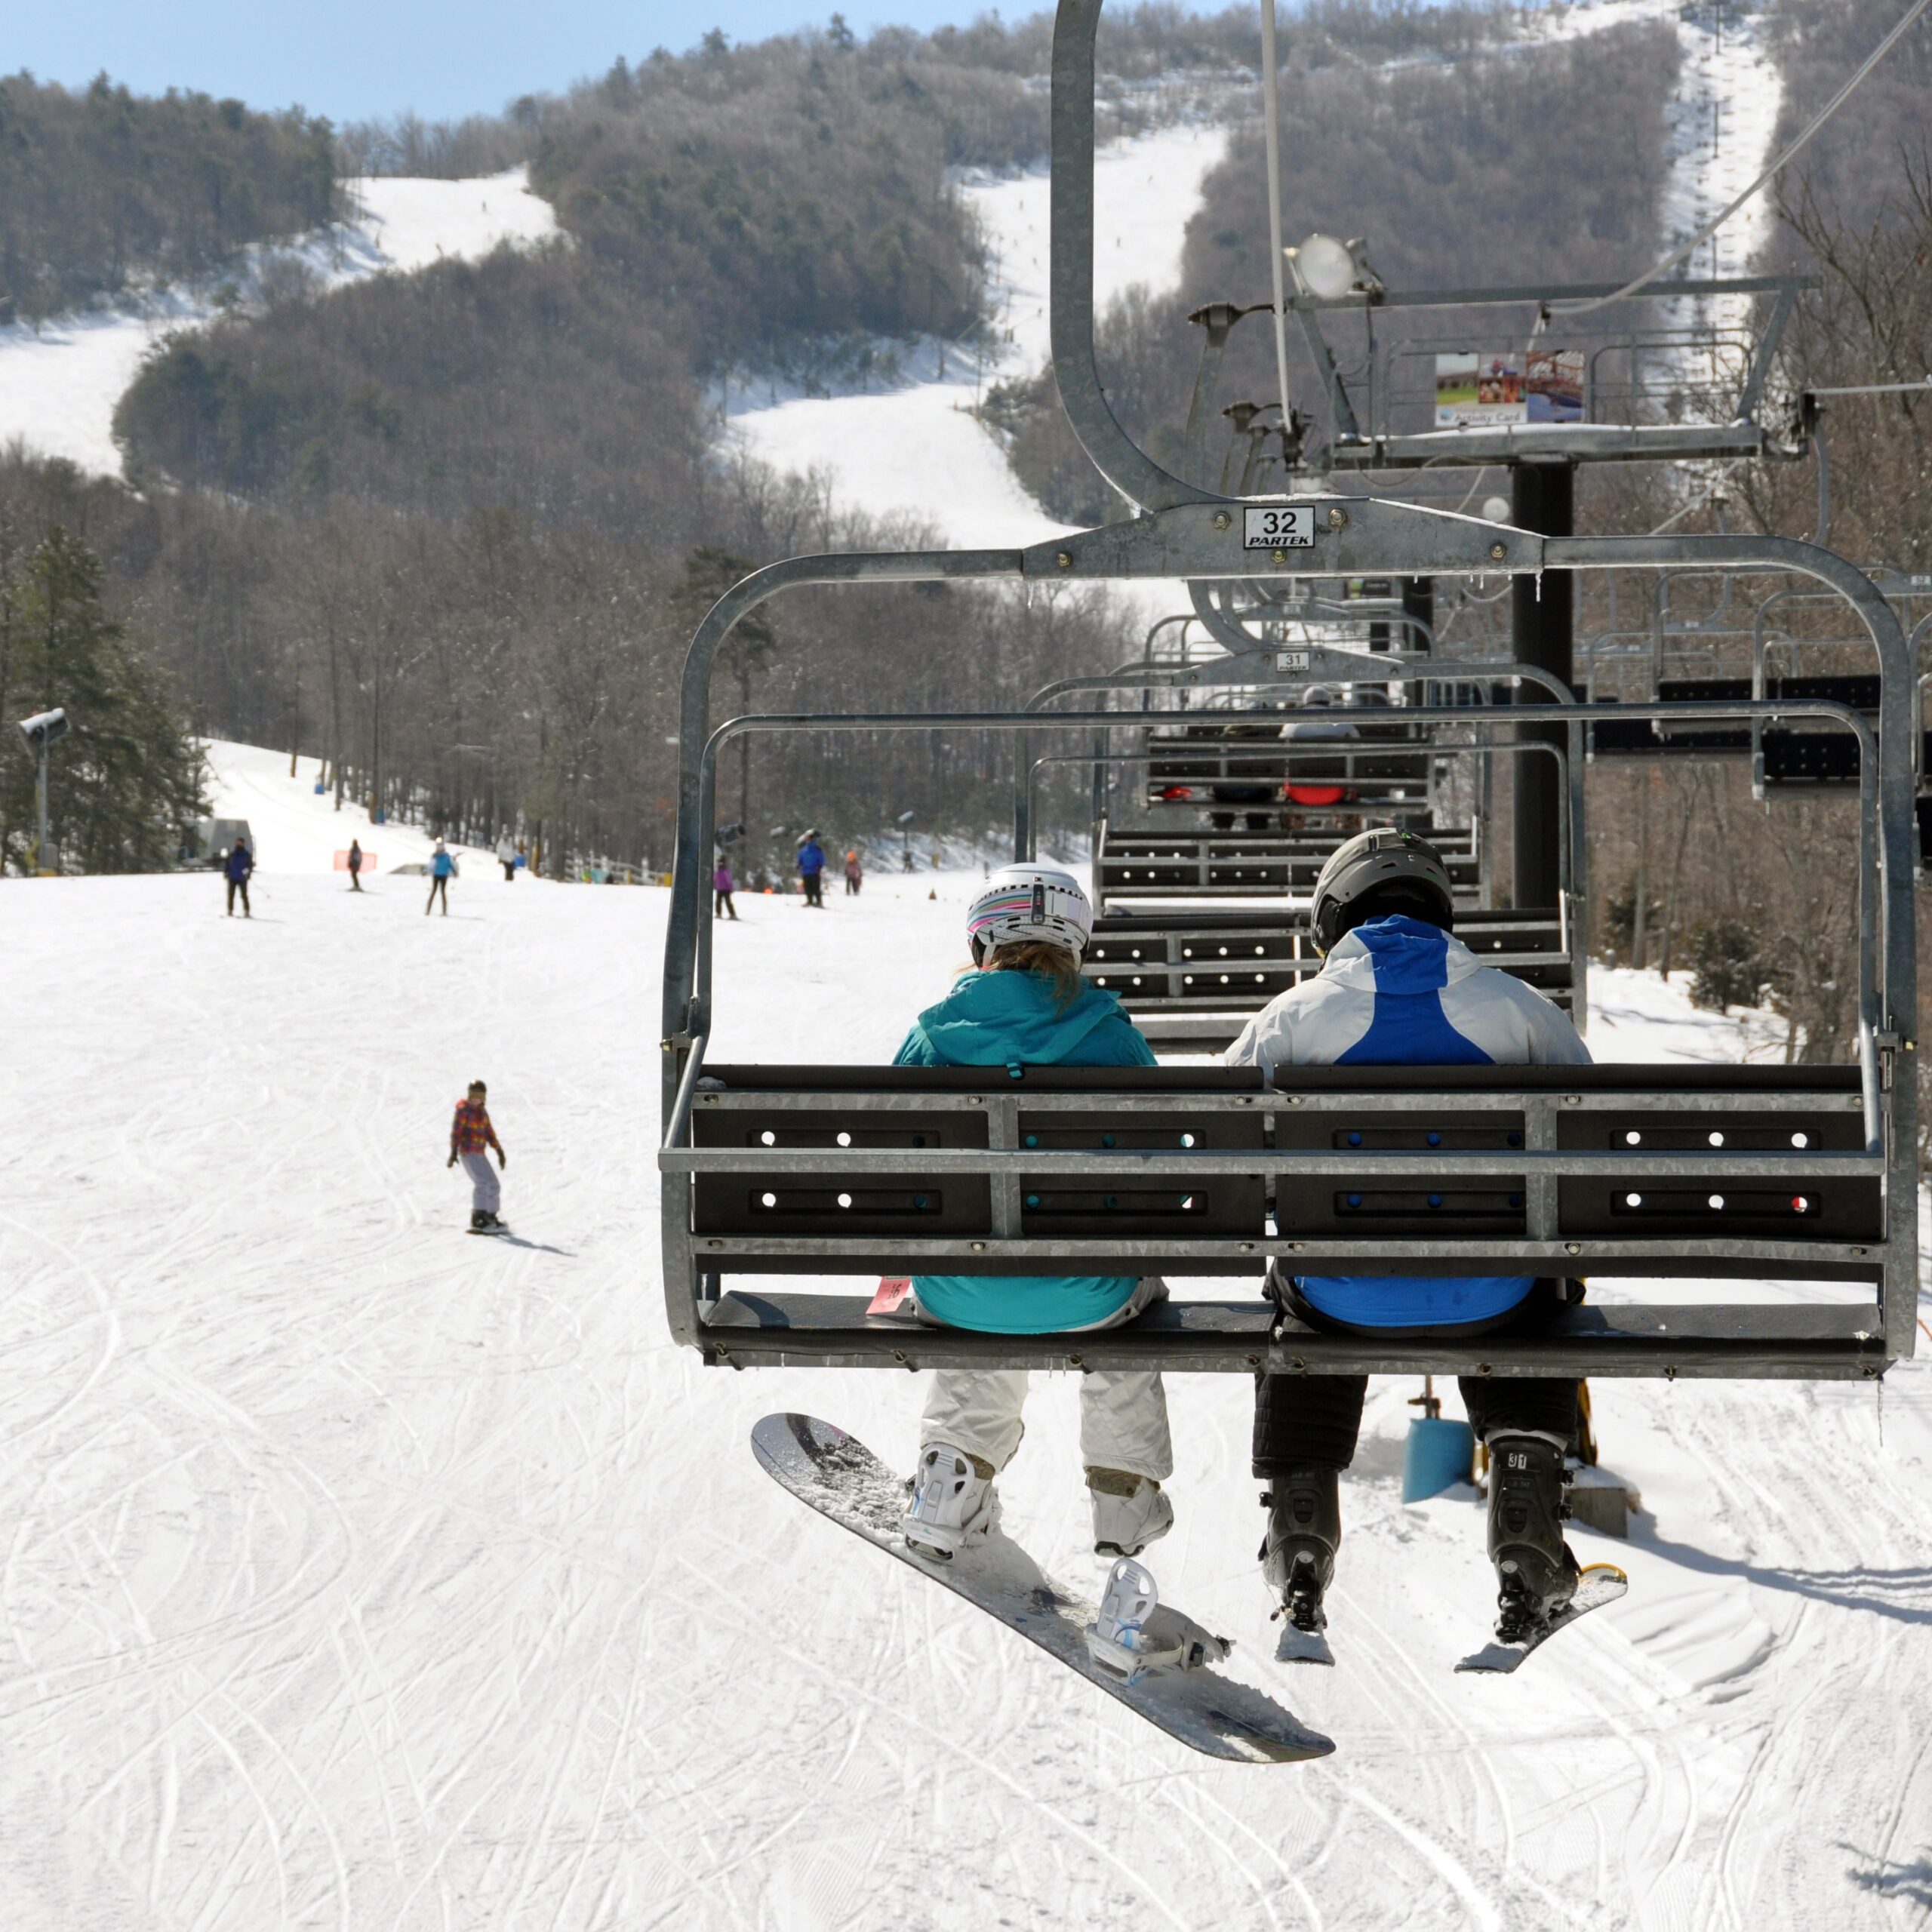 People on a ski lift above snowy mountains at Massanutten Resort.